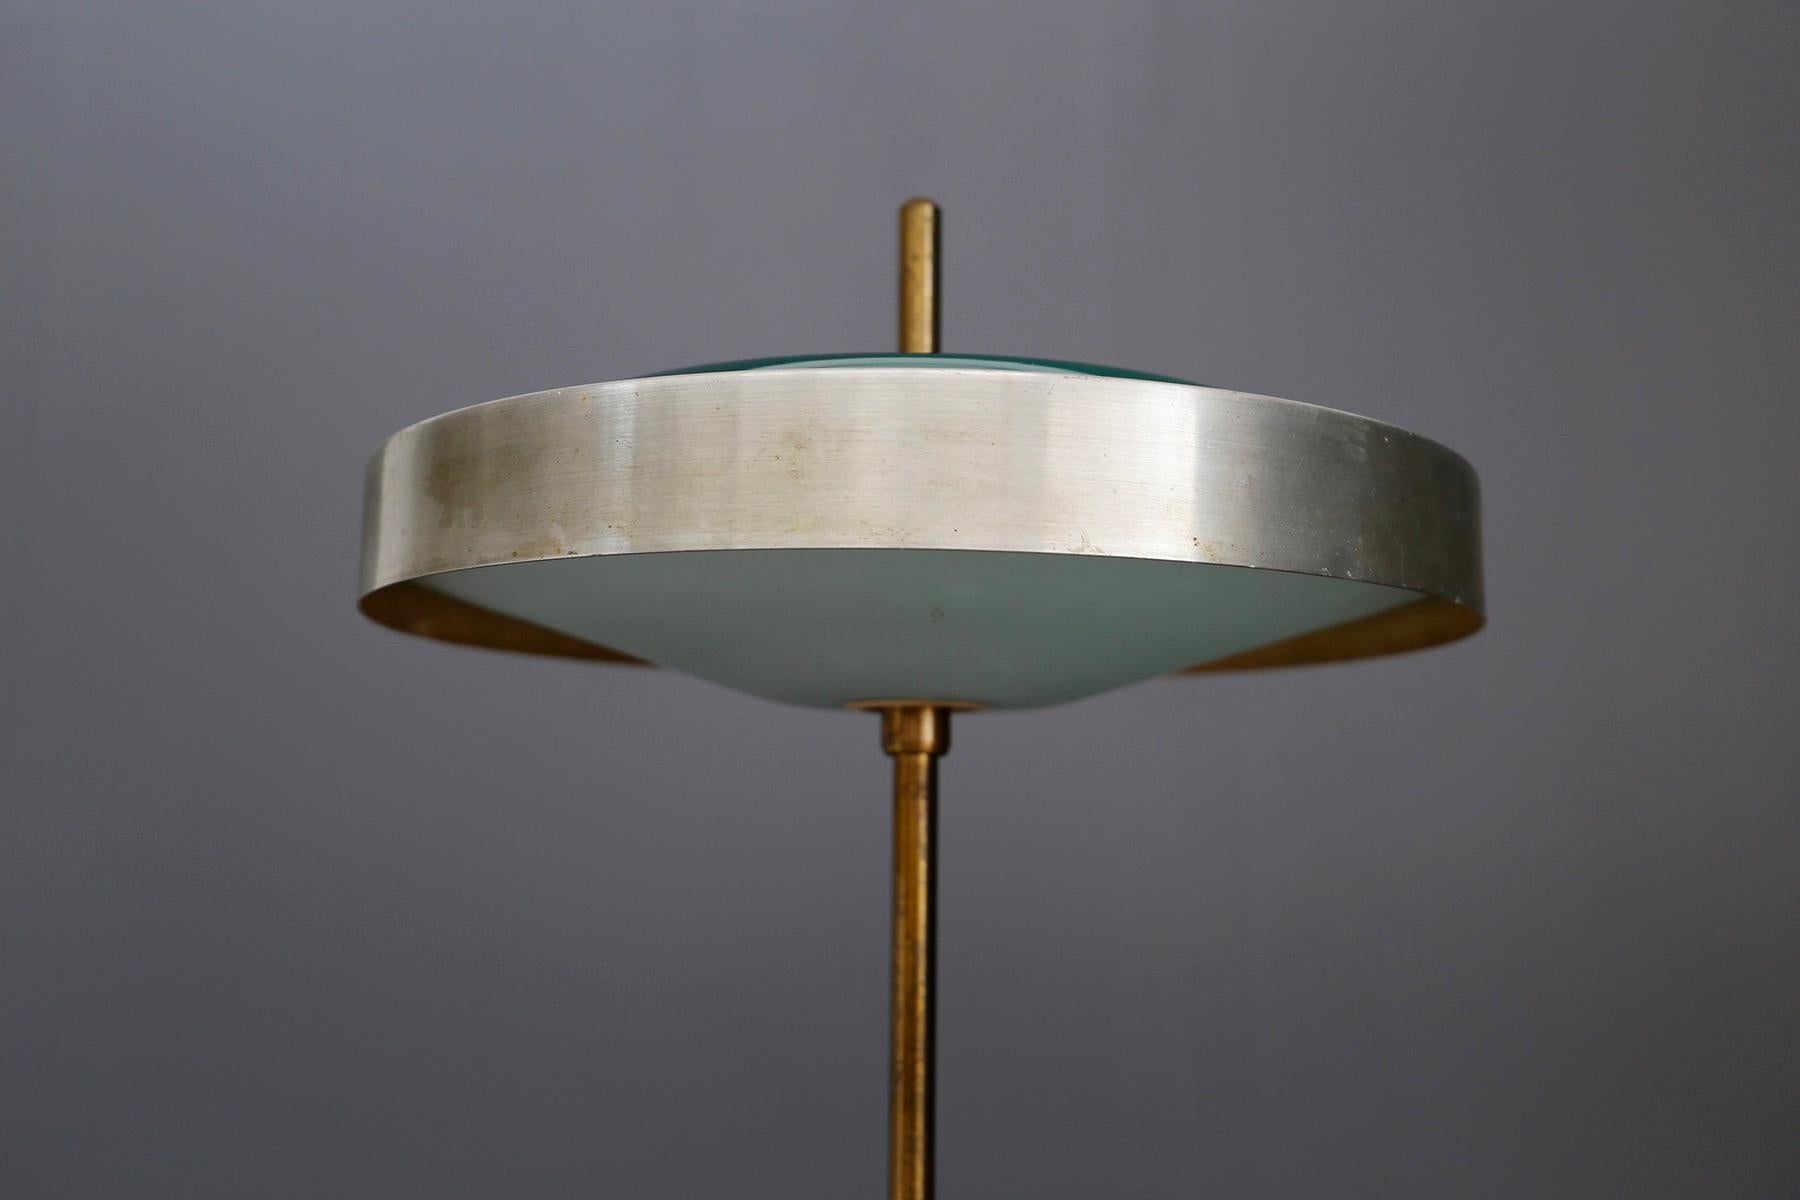 Oscar Torlasco Midcentury Table Lamp in Brass and Cased Glass by Lumi 1950s (Italienisch)